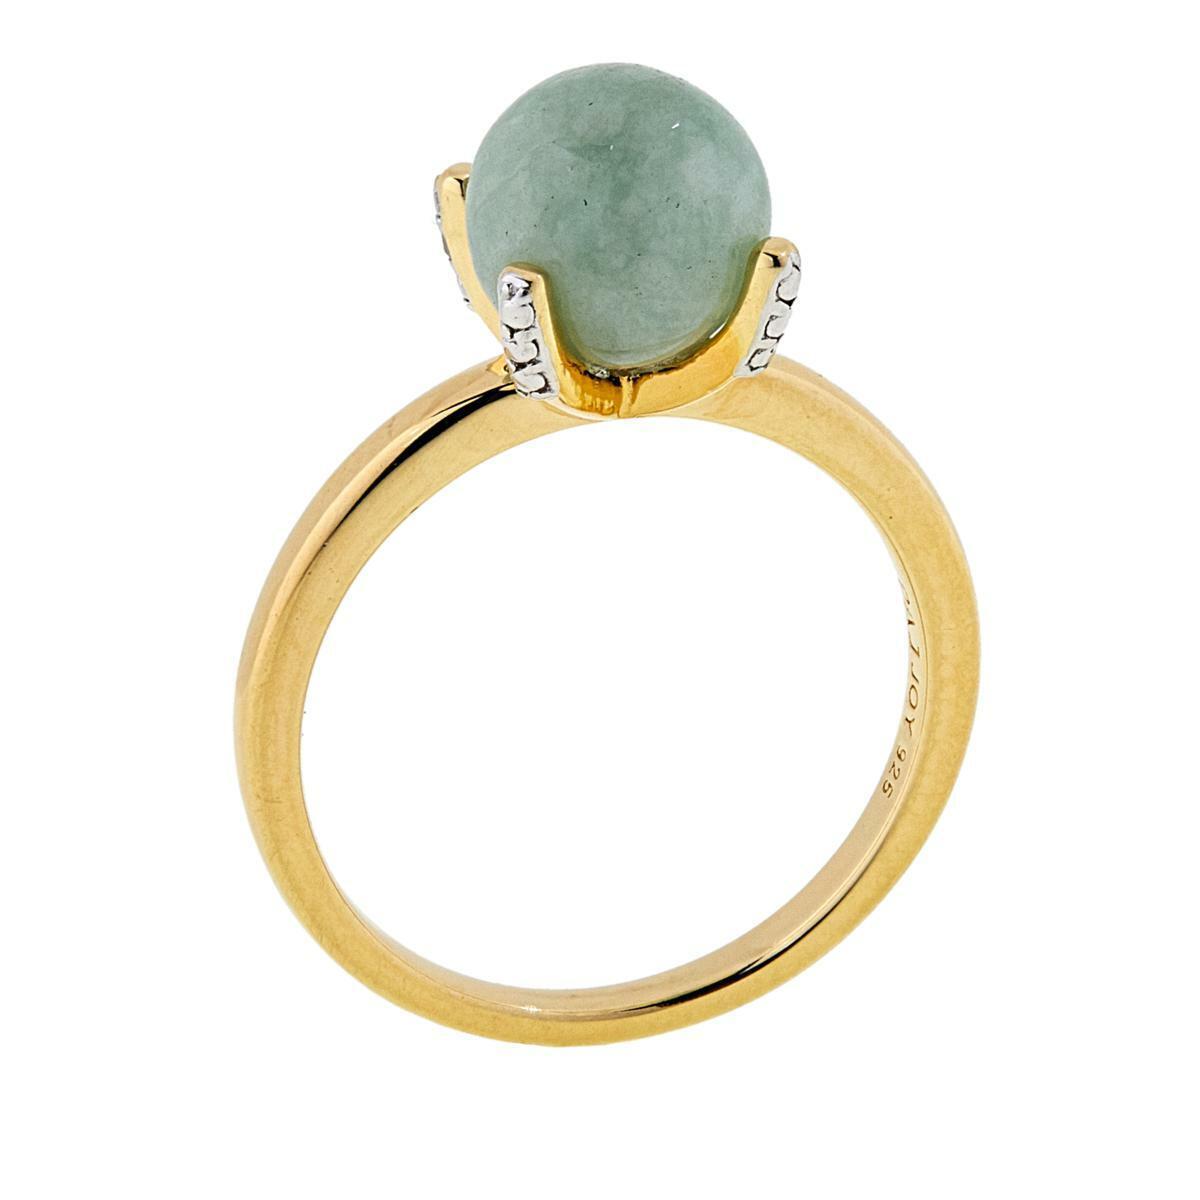 Jade of Yesteryear  SS Goldtone Green Jade & CZ Ring, Size 6